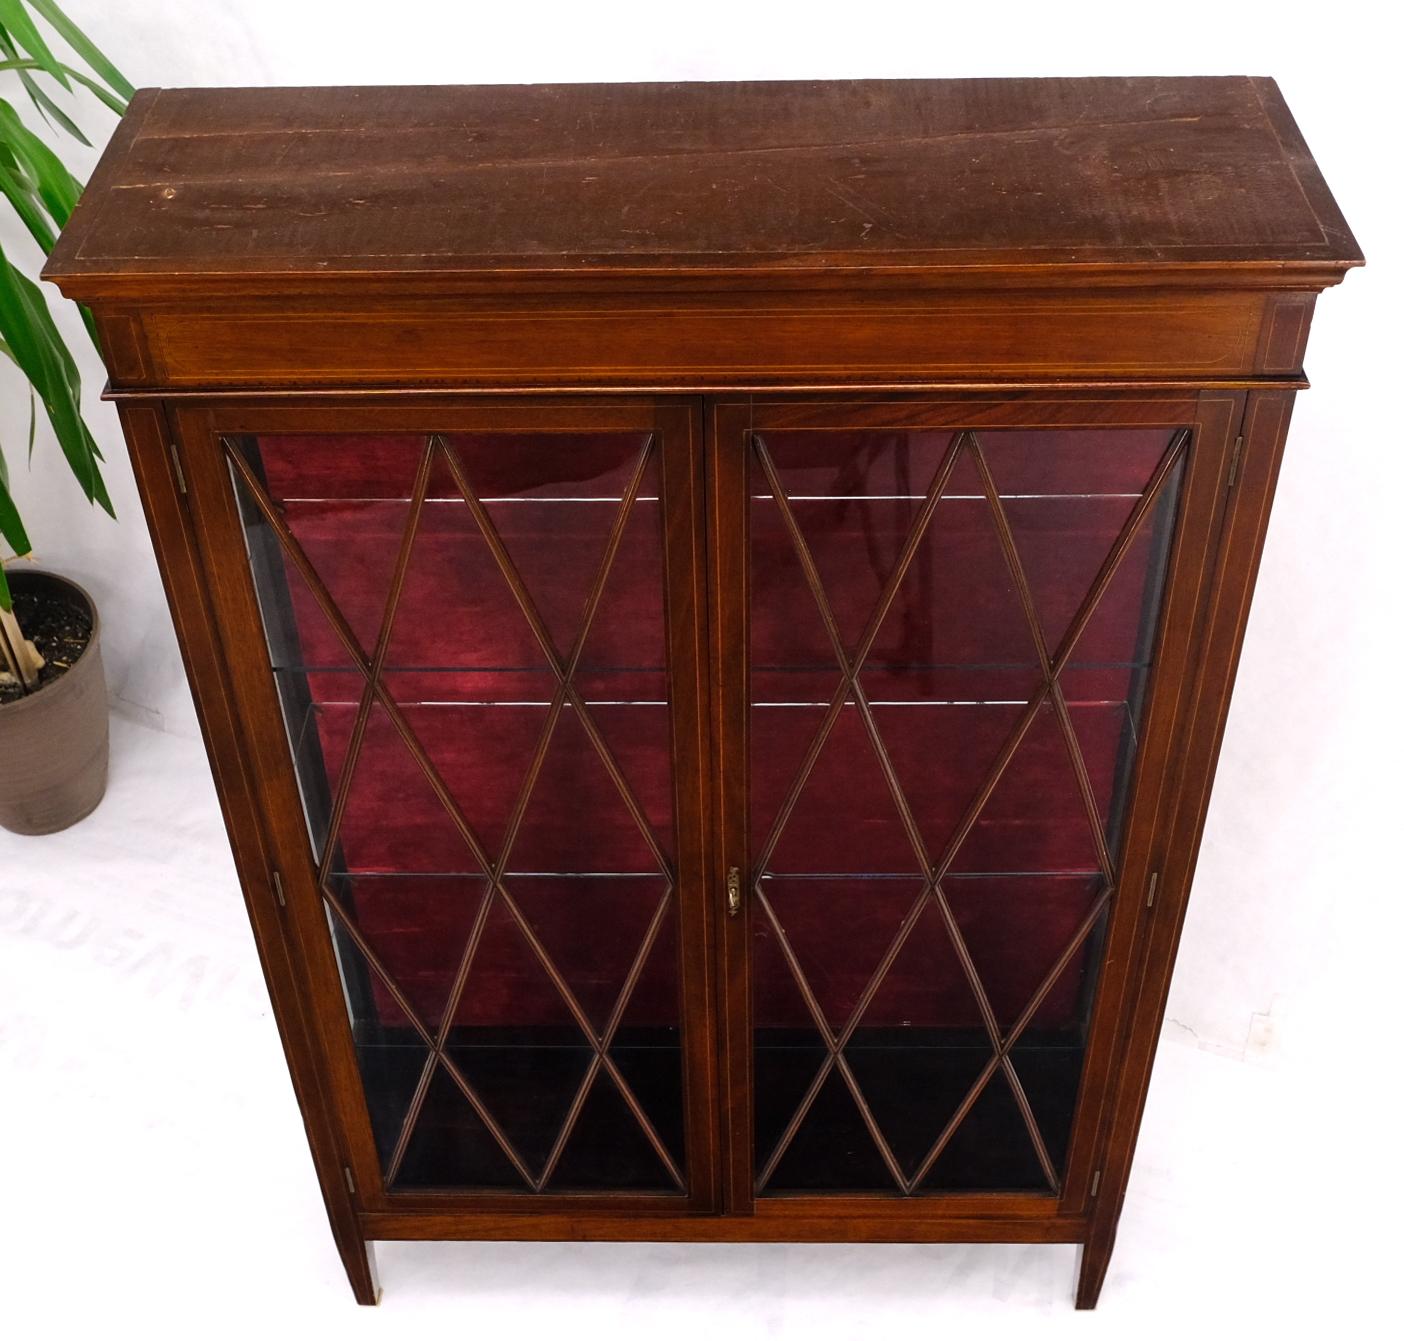 Lacquered Individual Glass Pane Double Doors Pencil Inlay Flame Mahogany Show Case For Sale